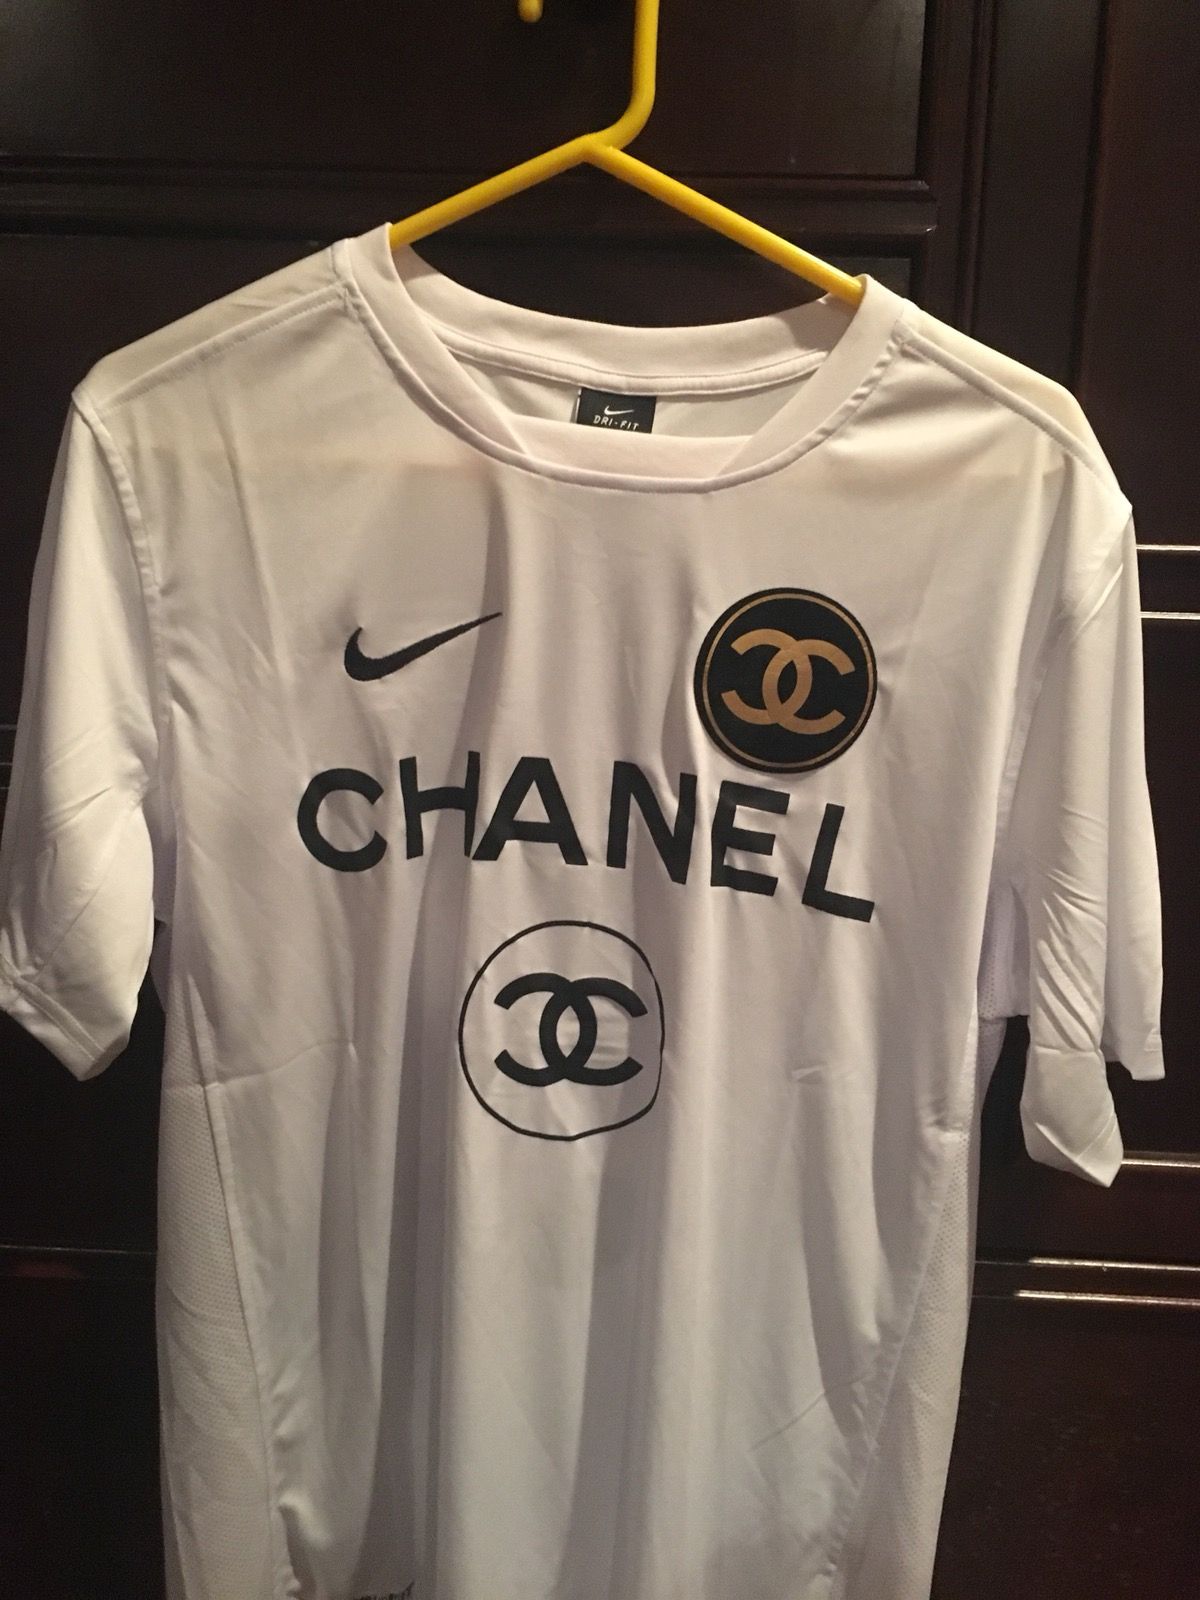 span stoomboot Fragiel Nike Nike x Chanel Coco Chanel Soccer Jersey | Grailed